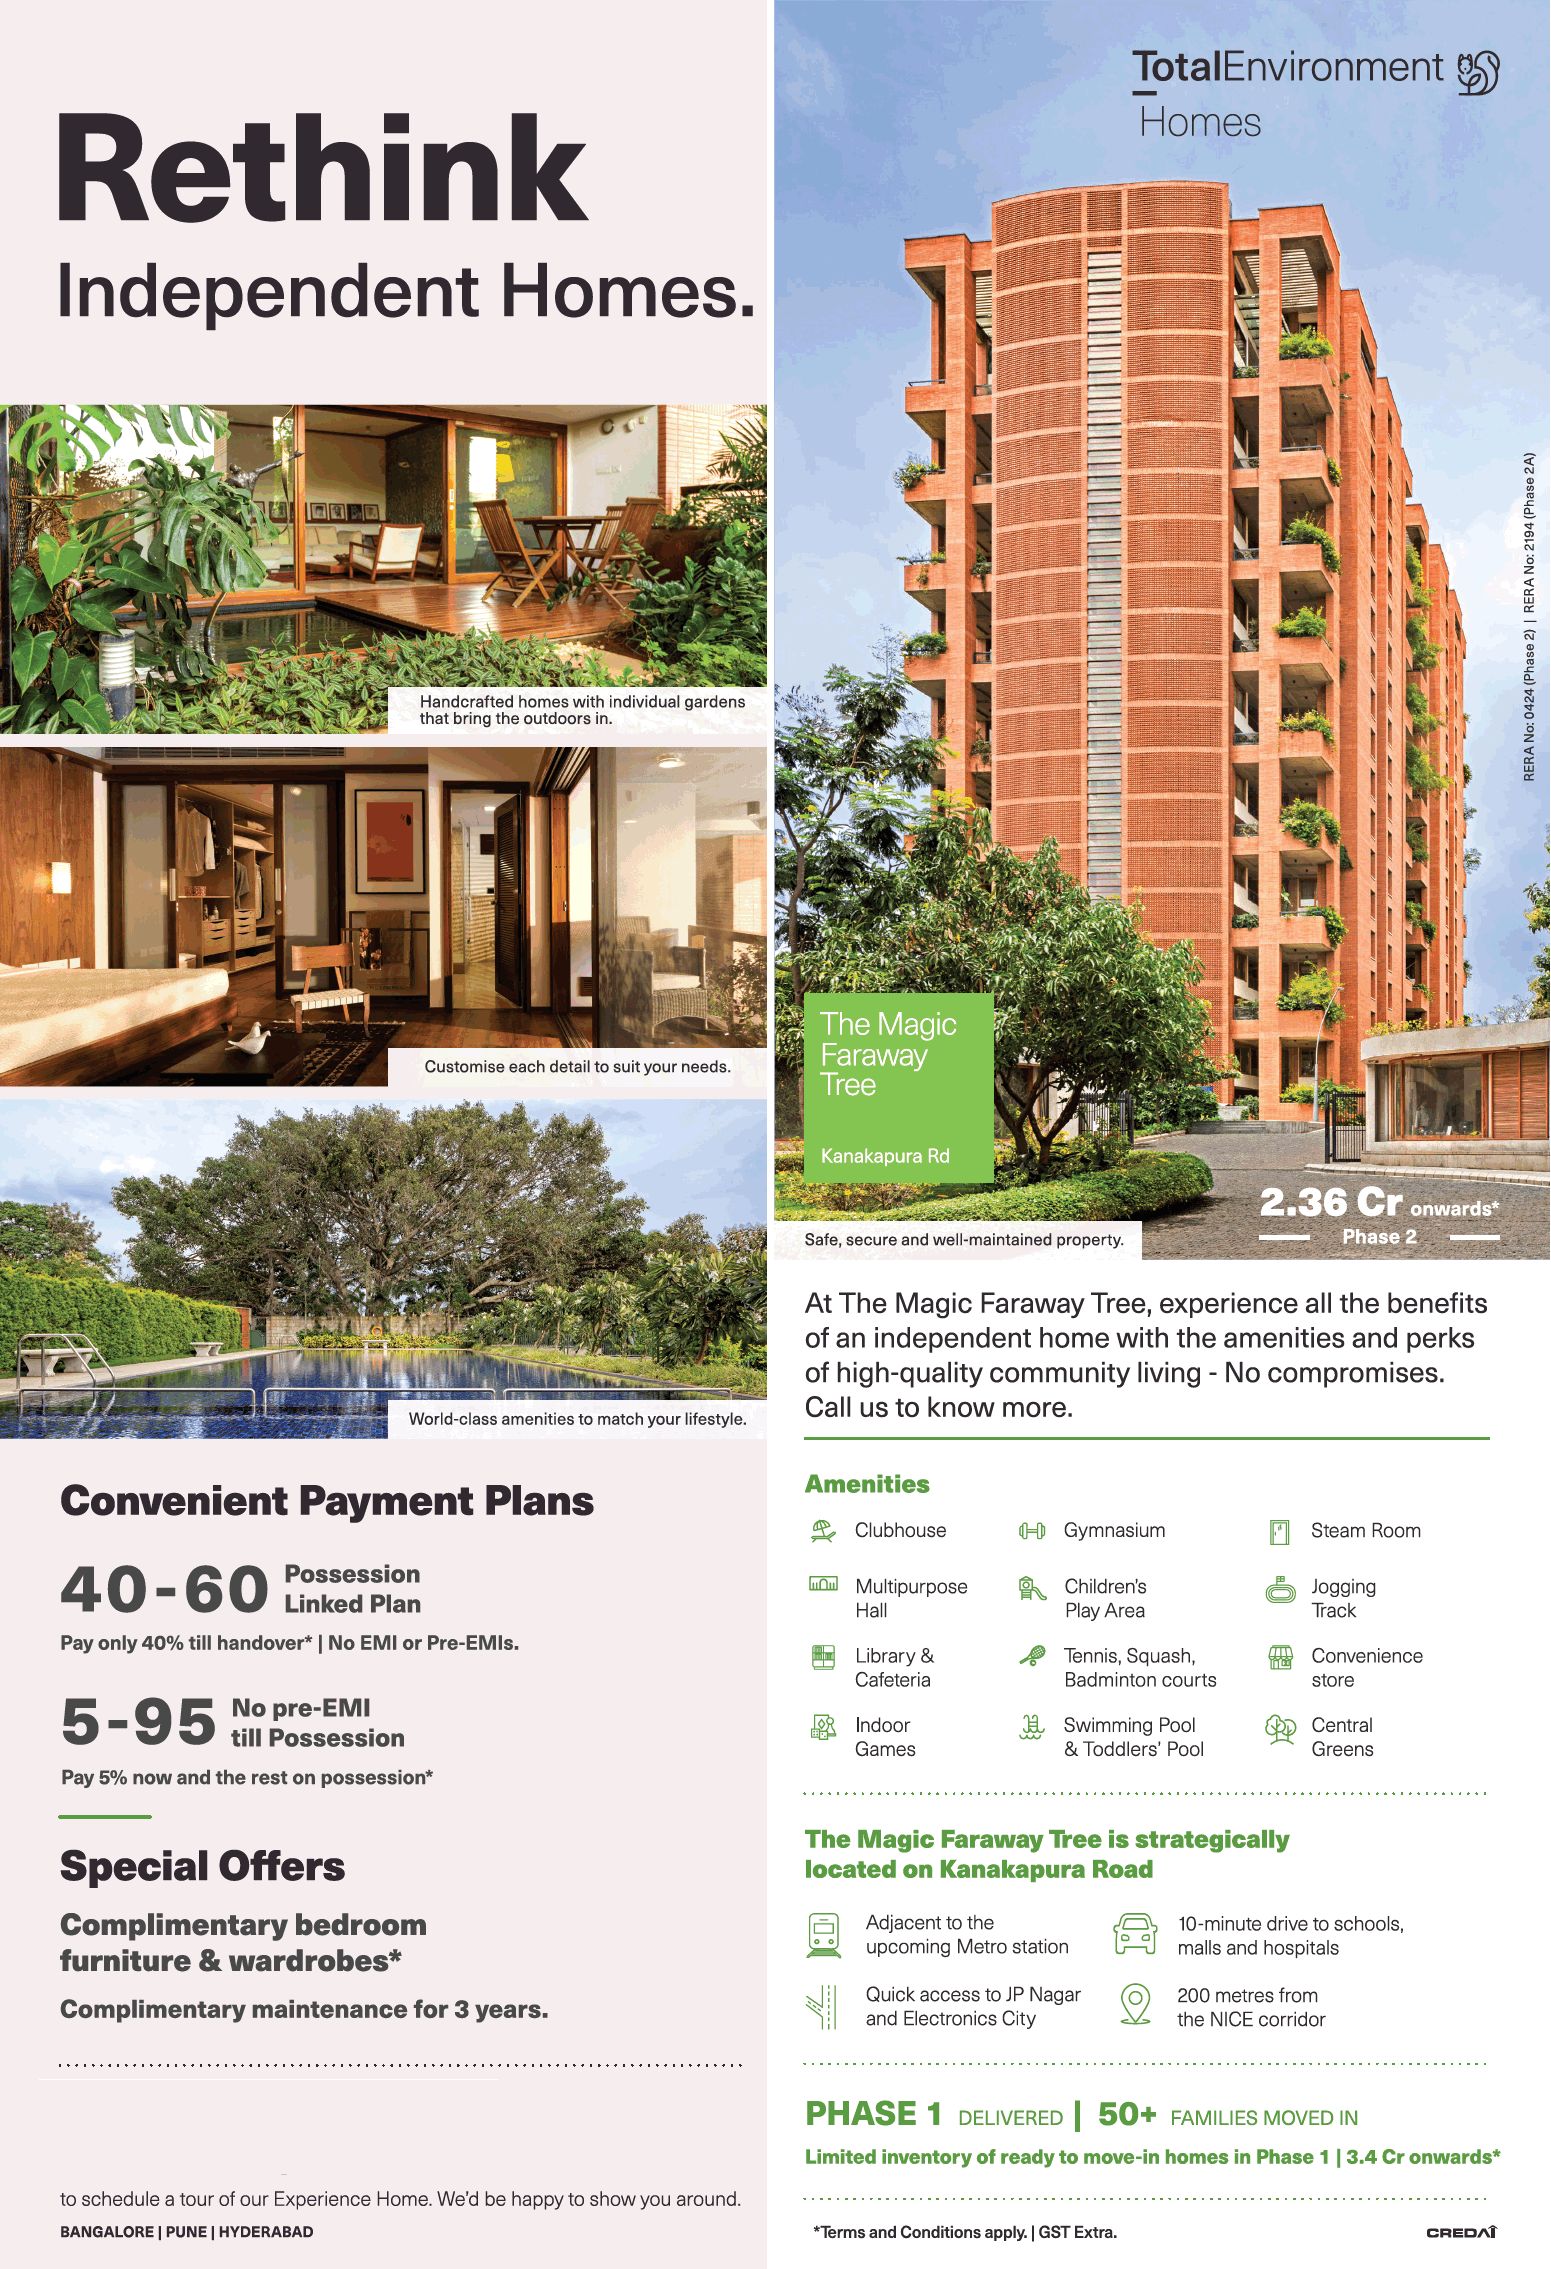 Limited inventory of ready to move-in homes in phase 1 Rs 3.4 Cr onwards at Total Environment The Magic Faraway Tree, Bangalore Update